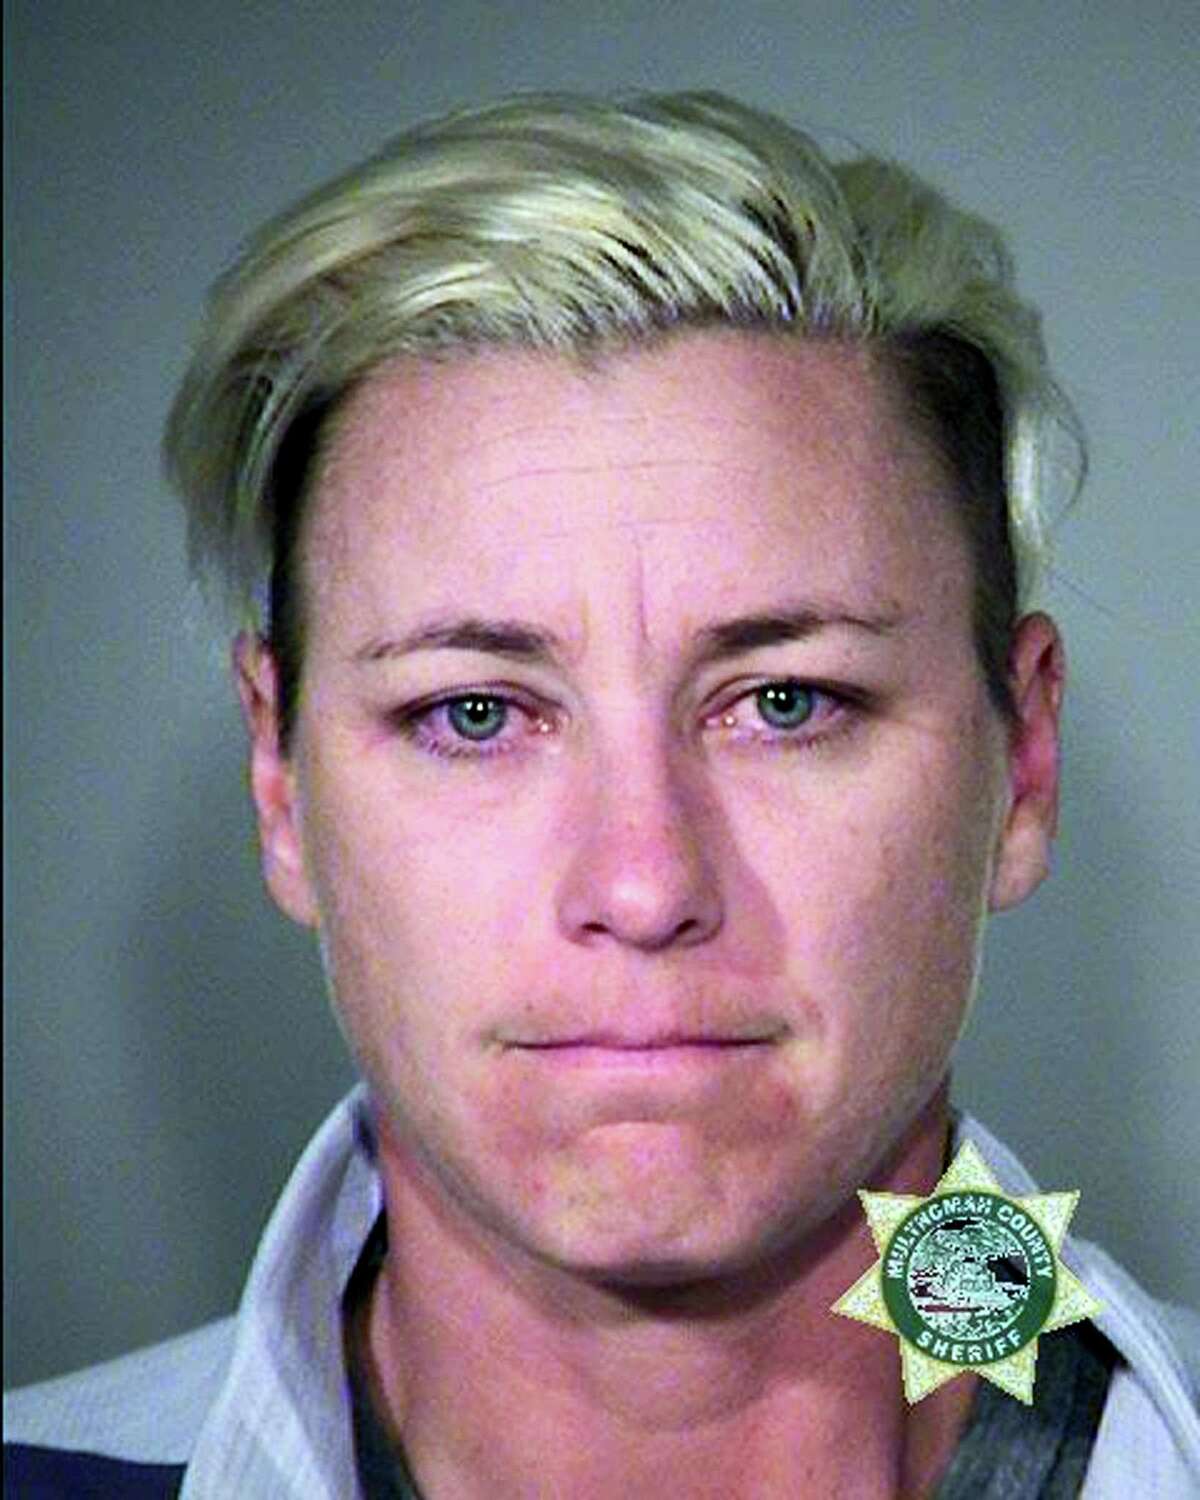 This undated mugshot provided by Multnomah County Sheriff’s Office shows retired World Cup soccer champion Abby Wambach.